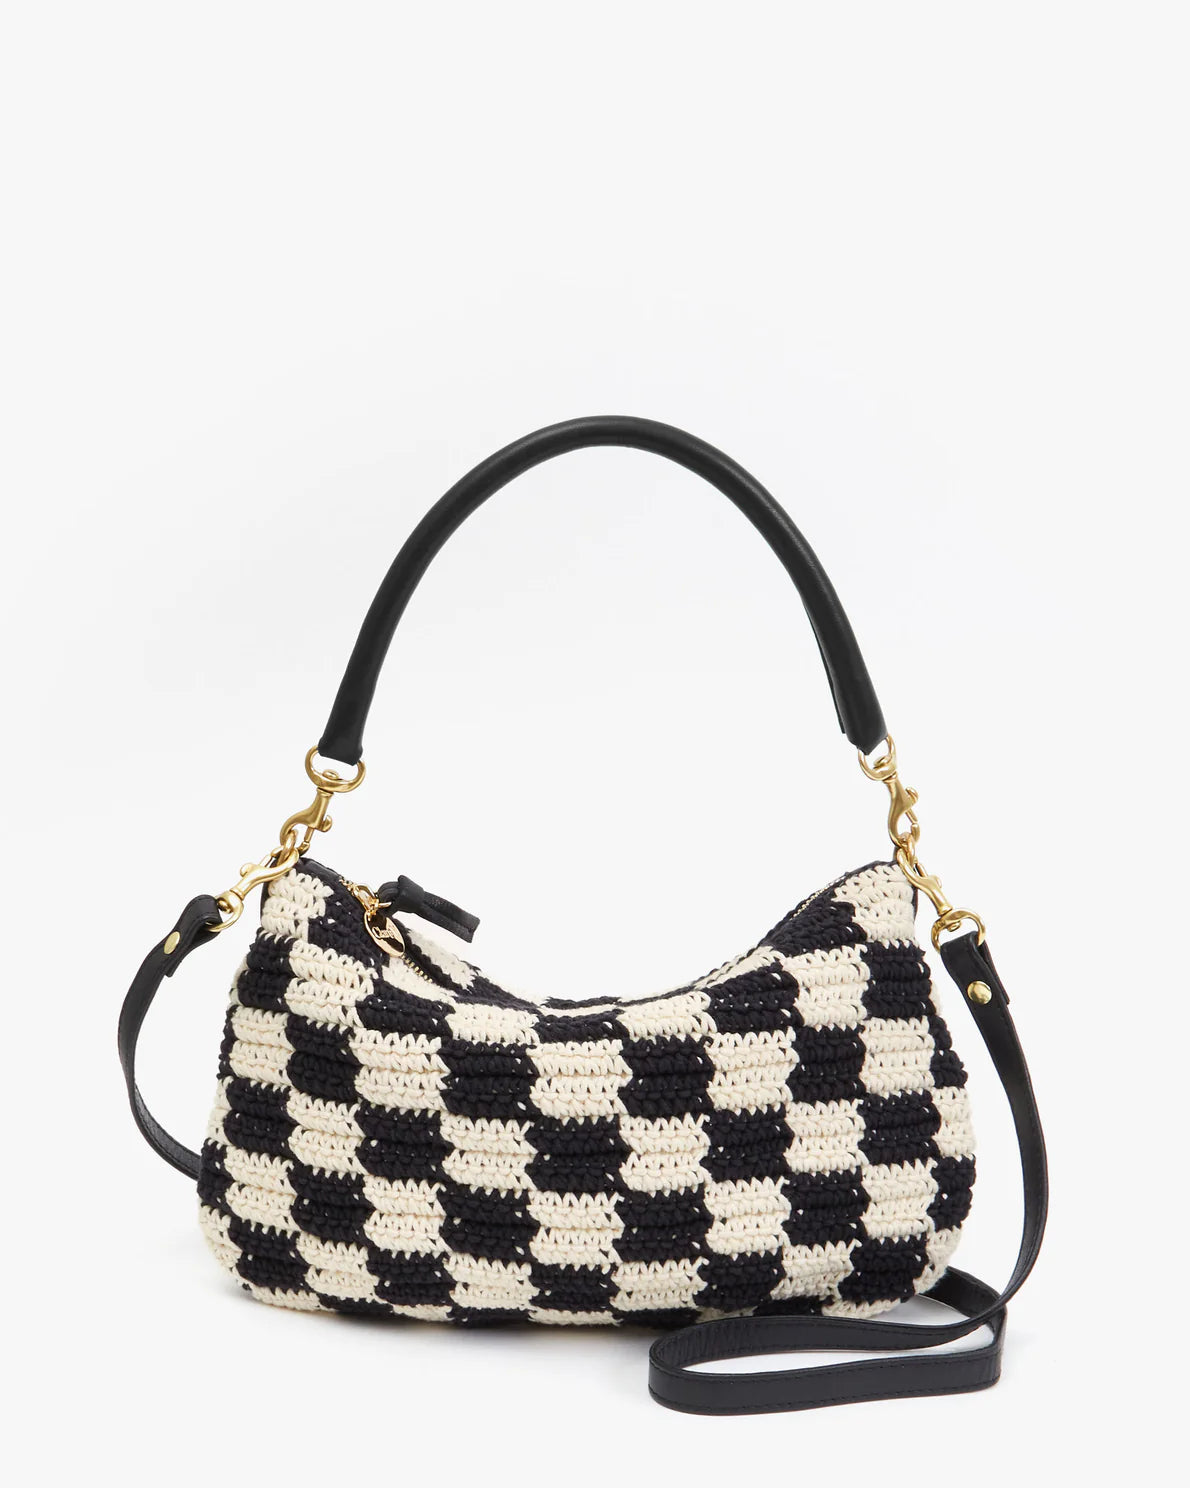 A handcrafted Clare Vivier Petit Moyen Woven Checker mini messenger bag with a black and cream checkered pattern, featuring a detachable black leather shoulder strap and a single black leather handle. The bag includes gold-tone metal hardware and a zipper closure at the top.